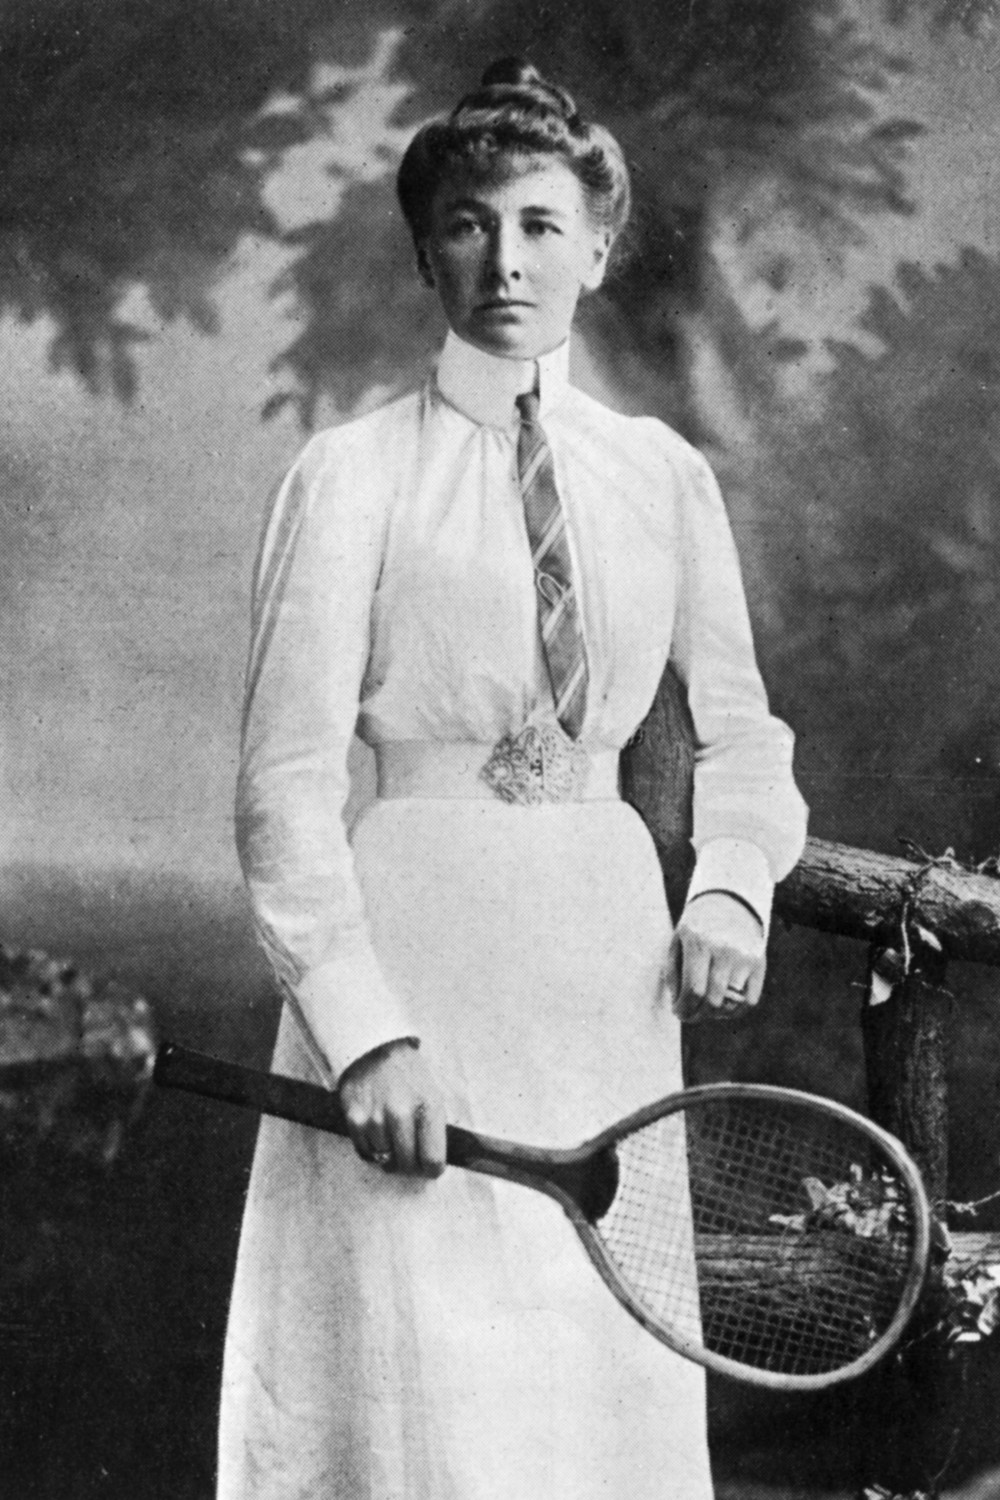 A black and white photo of Charlotte Sterry holding her tennis racket